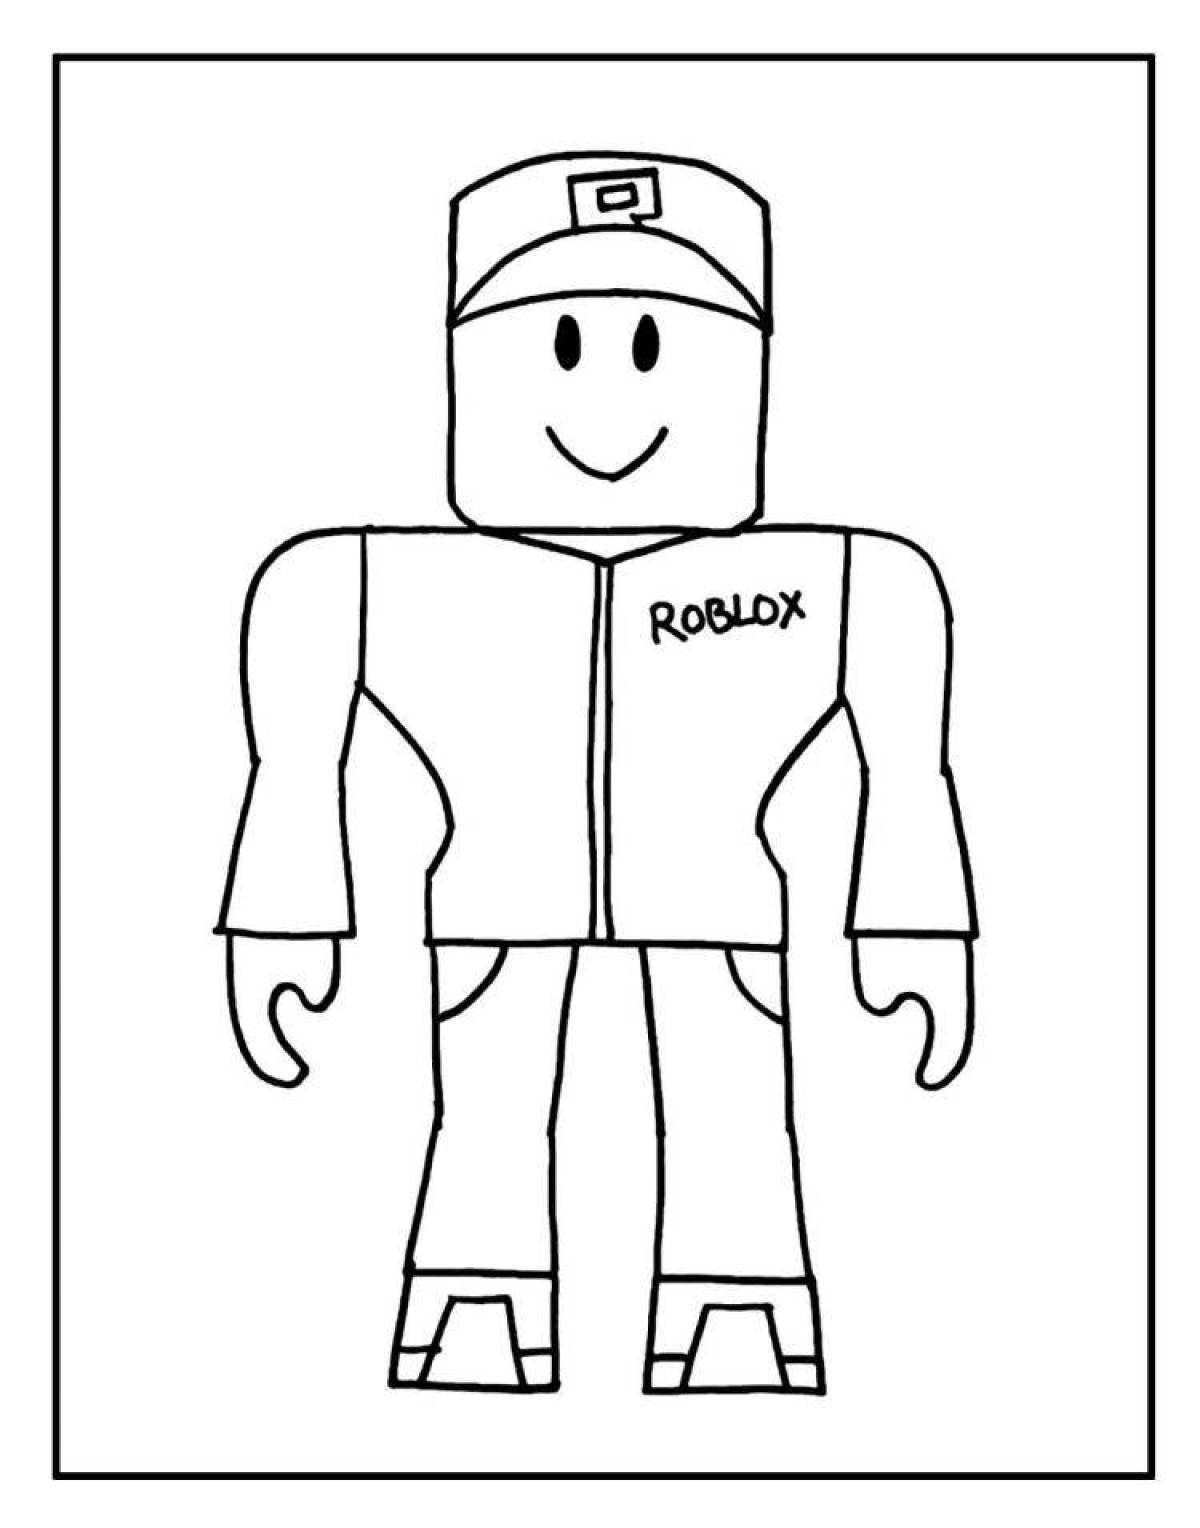 Exciting roblox face coloring page